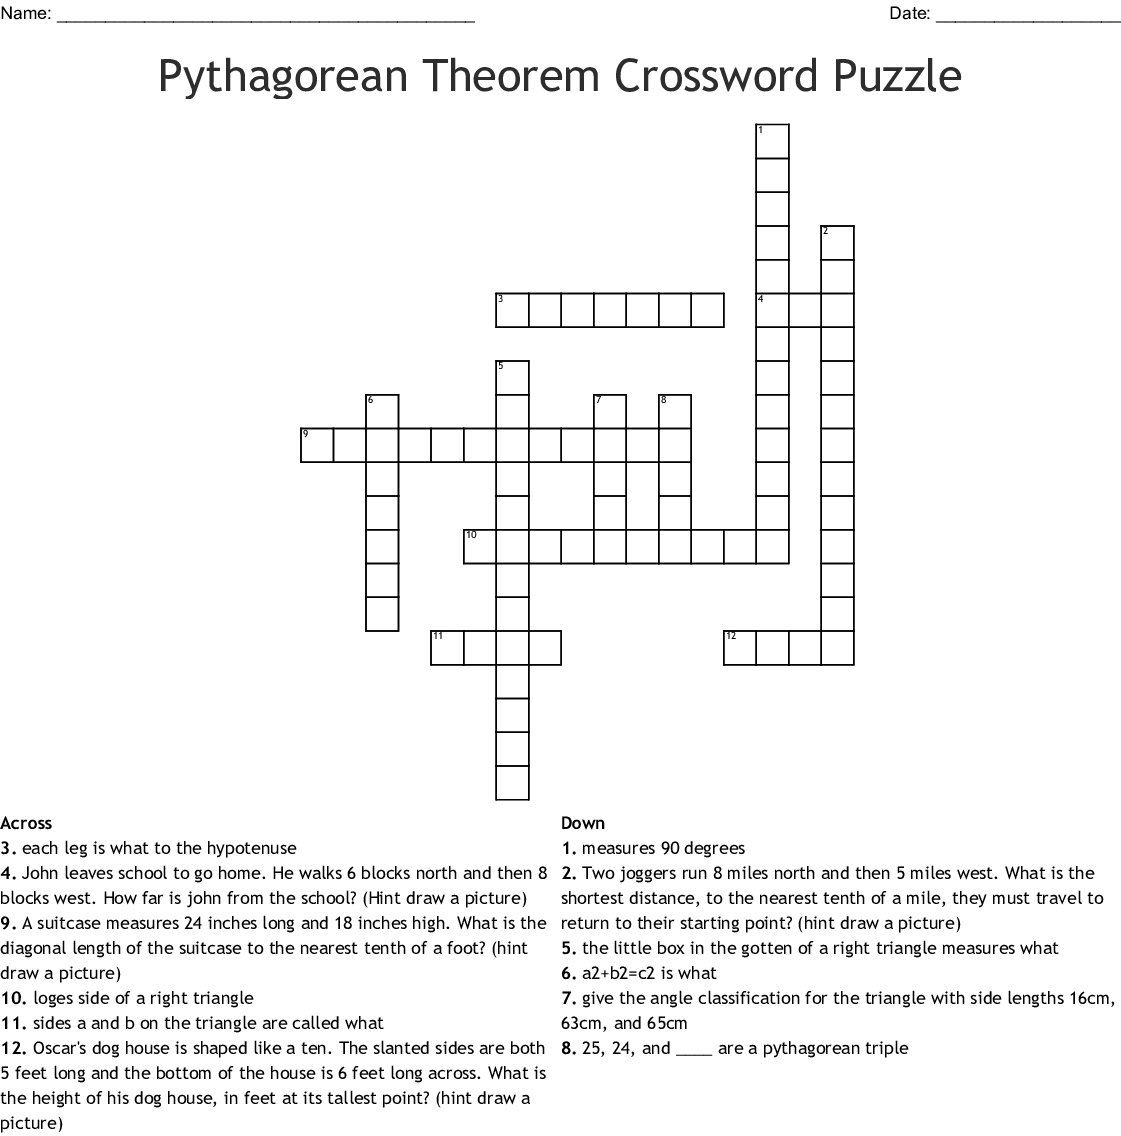 Pythagorean Theorem Crossword Puzzle  Wordmint Together With Pythagorean Puzzle Worksheet Answers